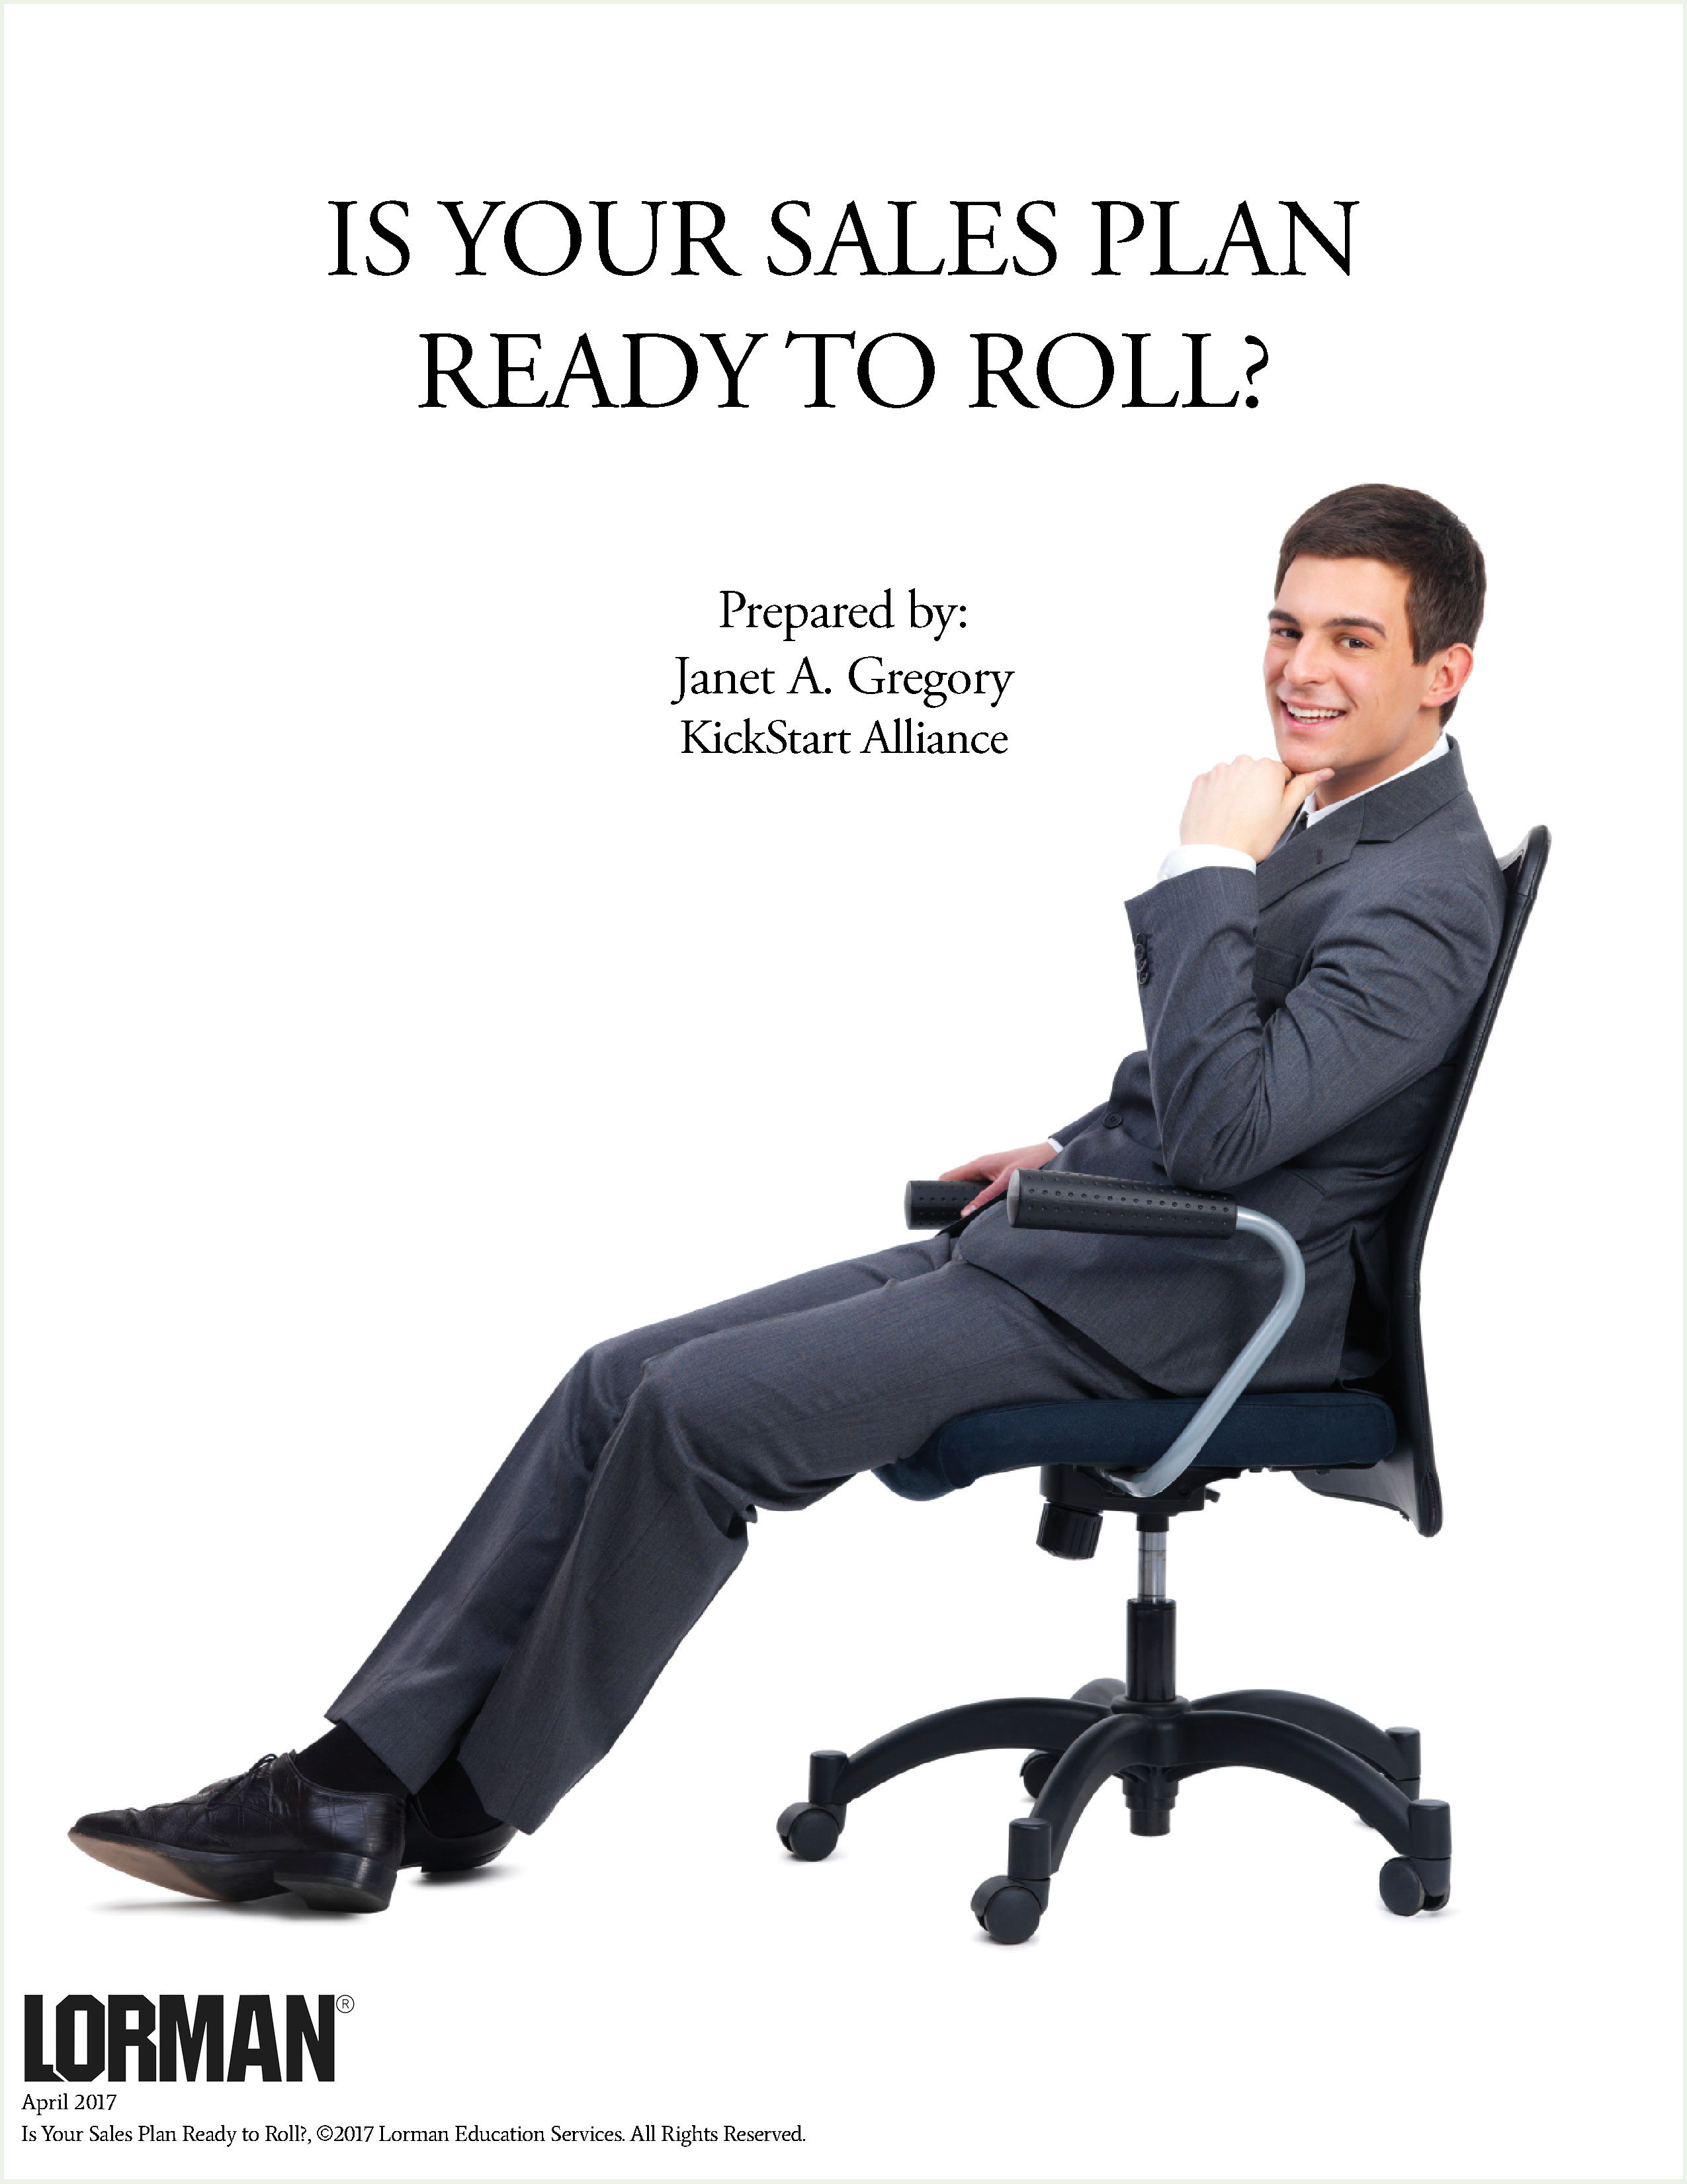 Is Your Sales Plan Ready to Roll?